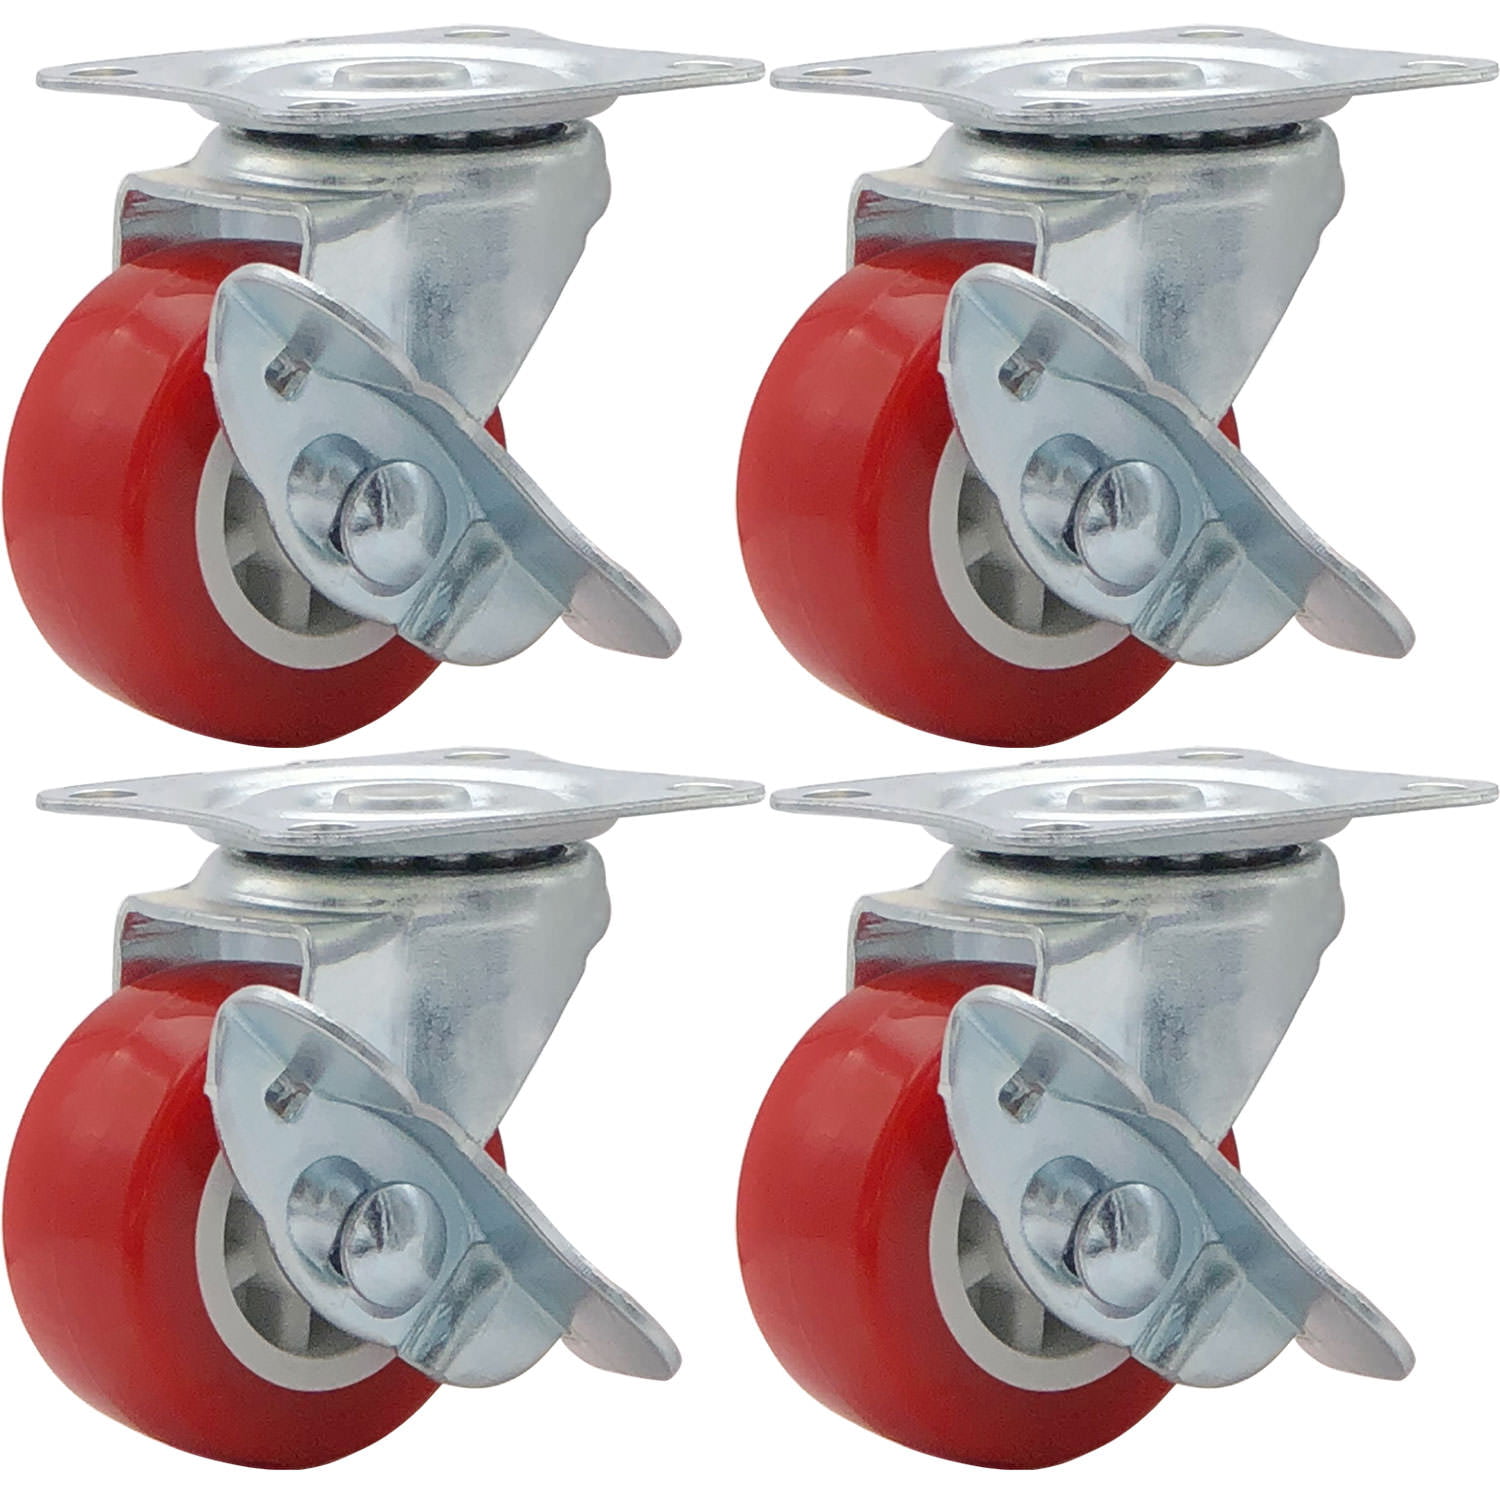 1.5" Low Profile Caster Wheels Soft Rubber Swivel Caster RED Lot of 50 